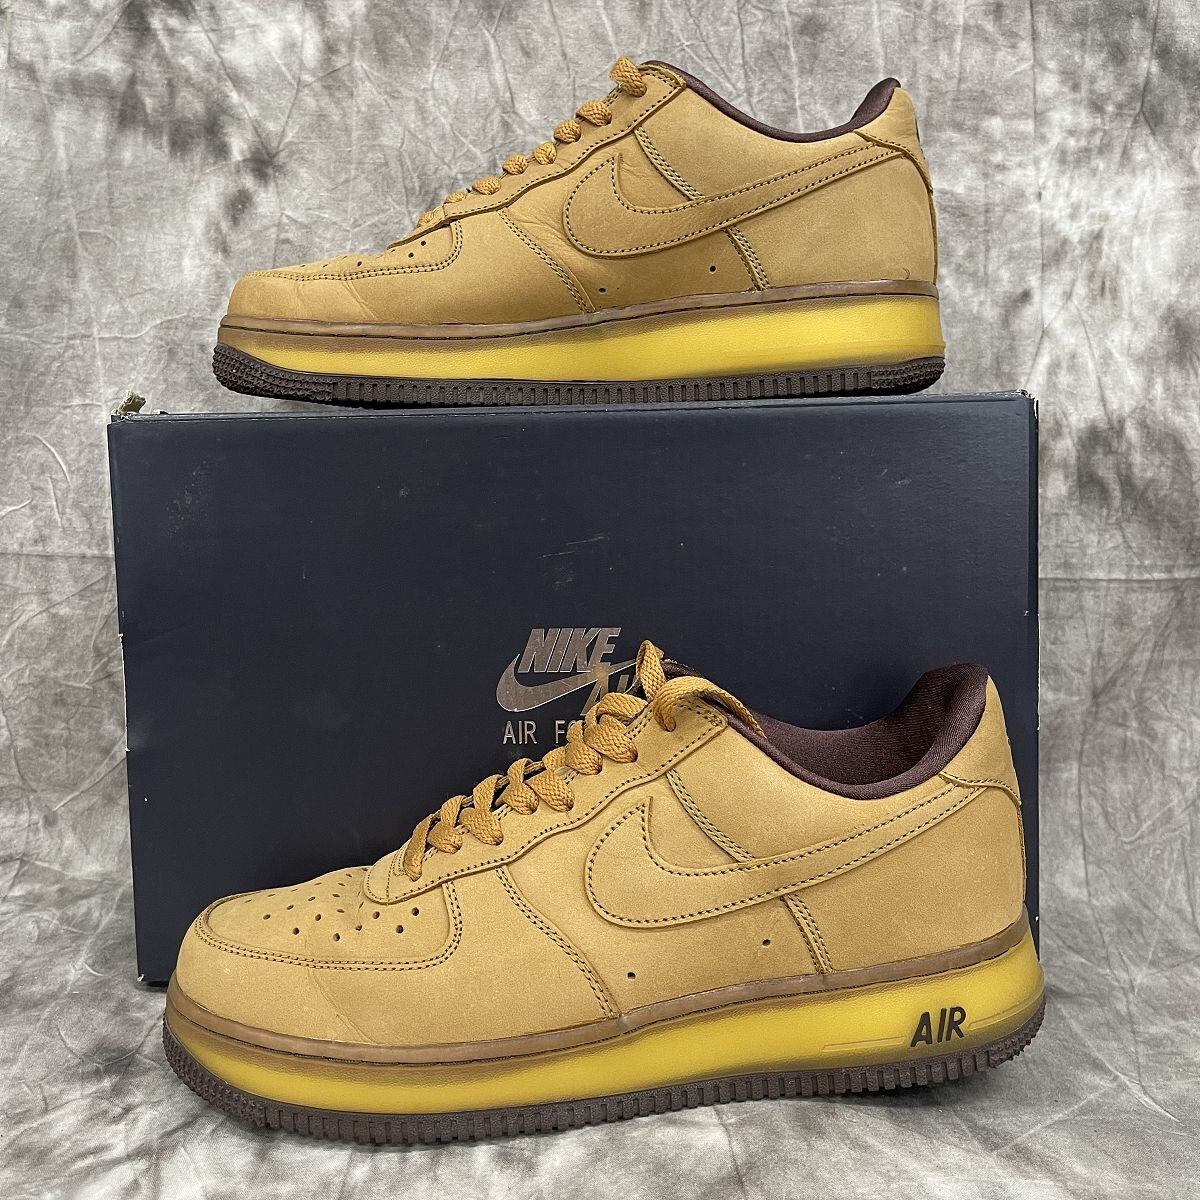 NIKE AIR FORCE 1 LOW PETRO SP CO.JP